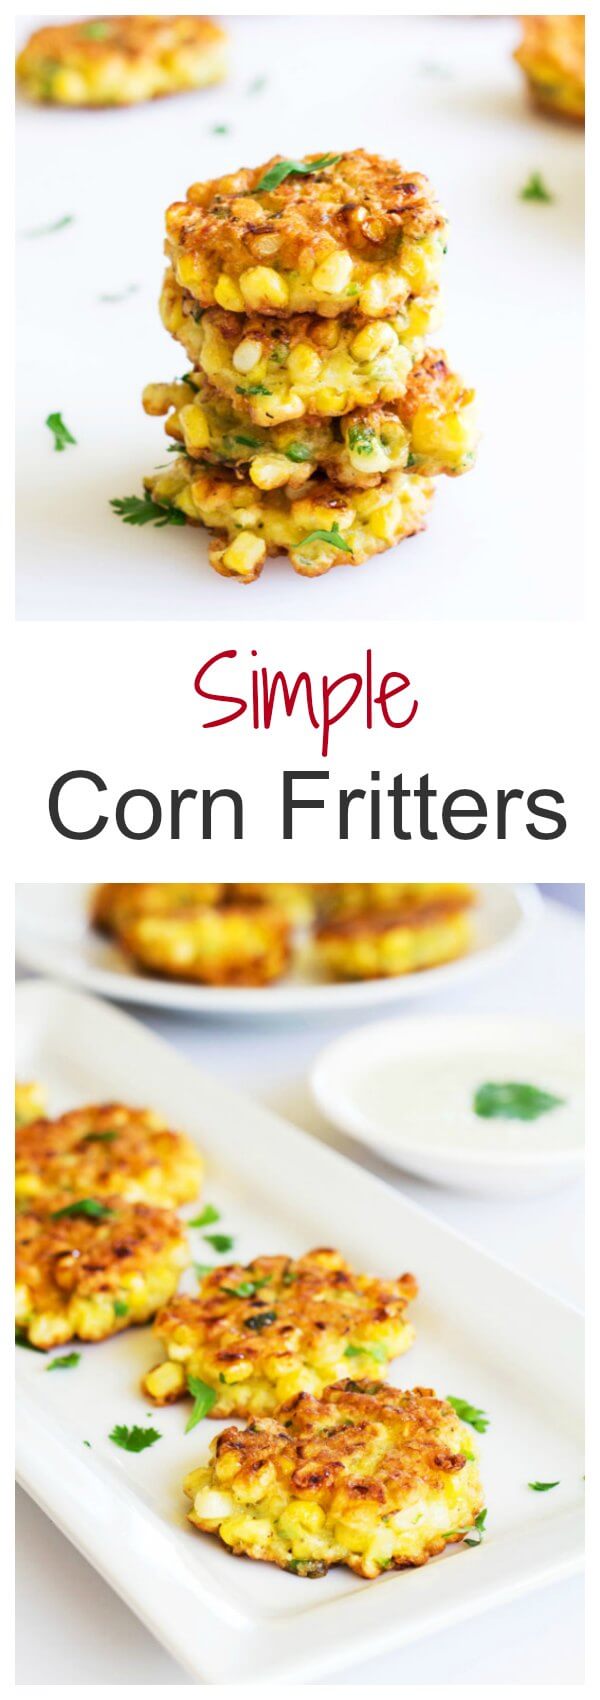 Bursting with crunchy sweet corns in every savory bite, these mini sweet corn fritters are comfort food at its best!